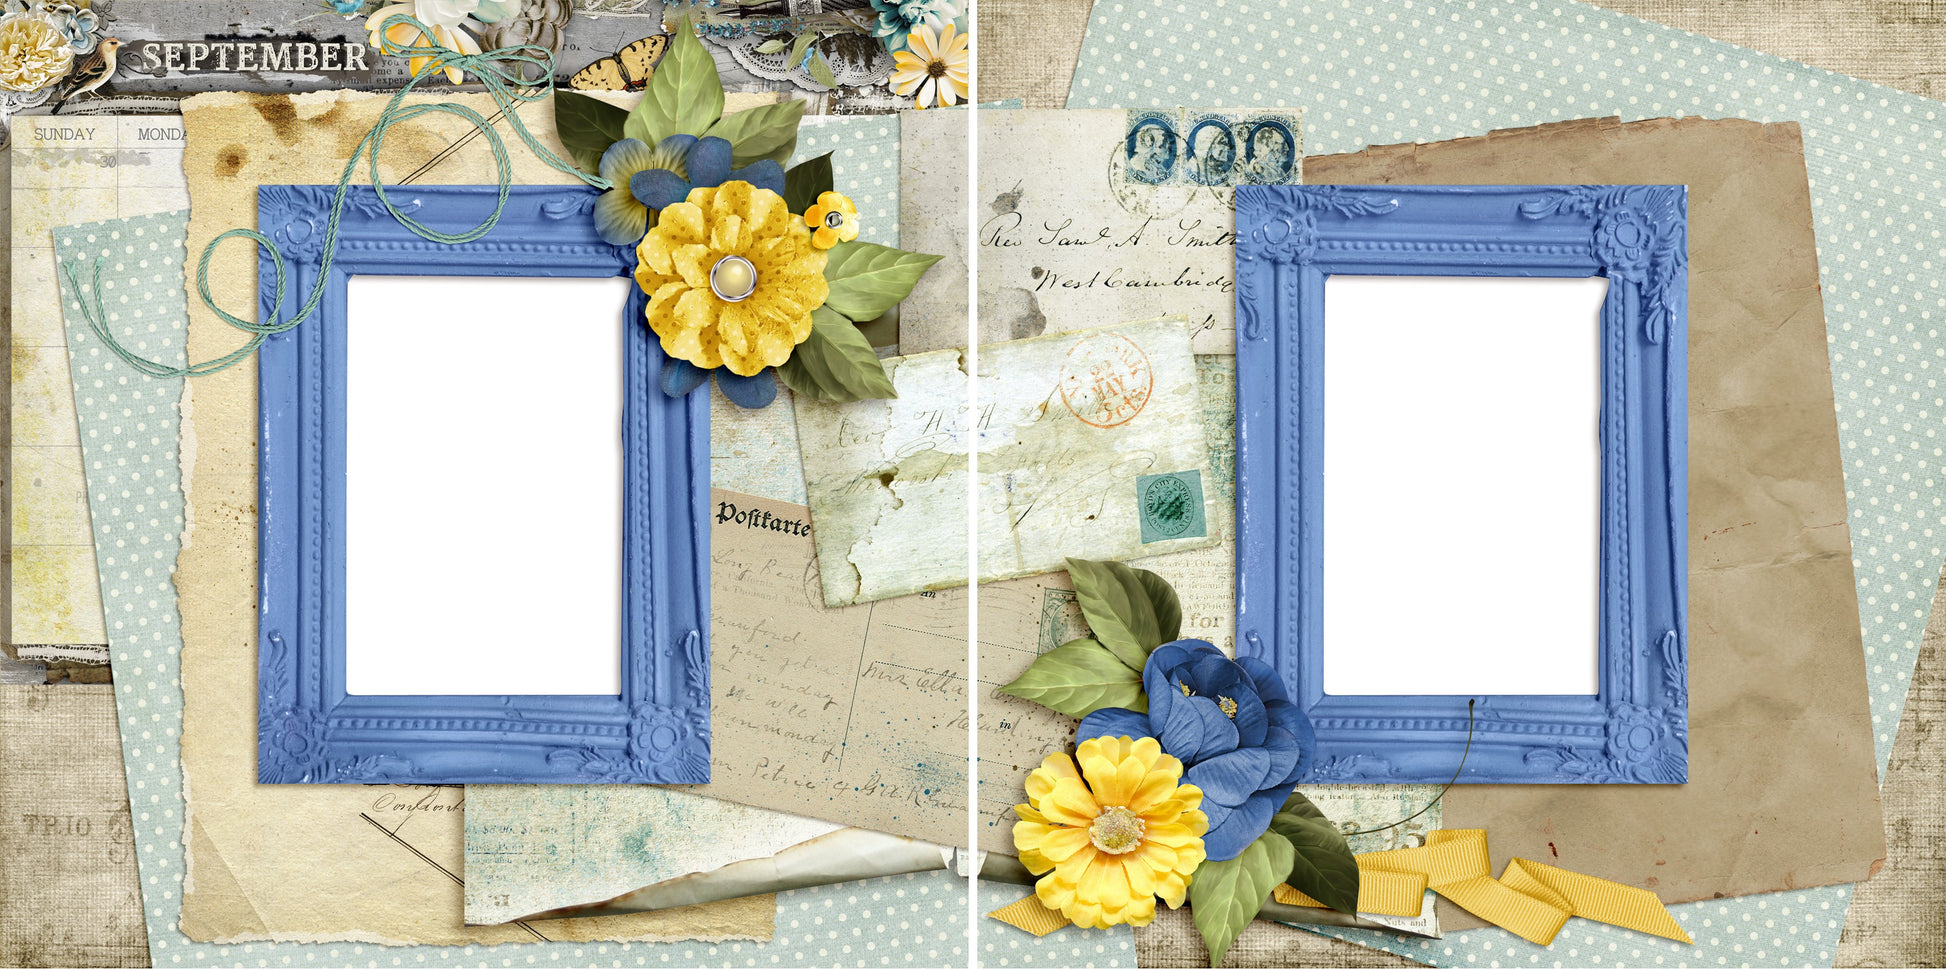 September - Digital Scrapbook Pages - INSTANT DOWNLOAD - EZscrapbooks Scrapbook Layouts Months of the Year